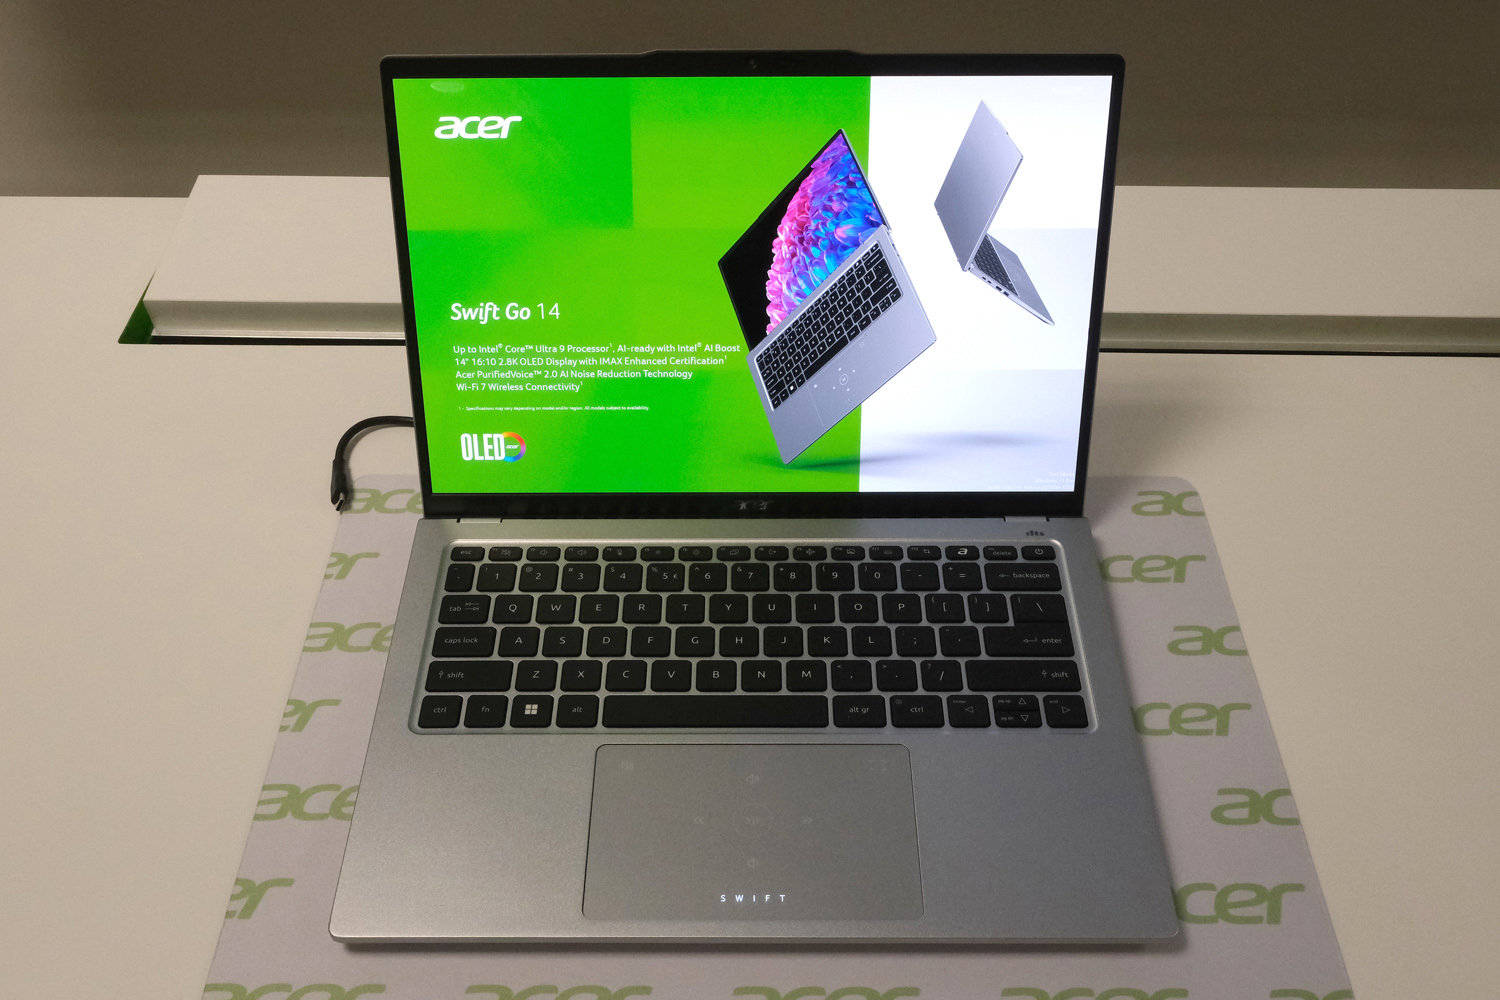 Acer Swift Go 14 hands-on front